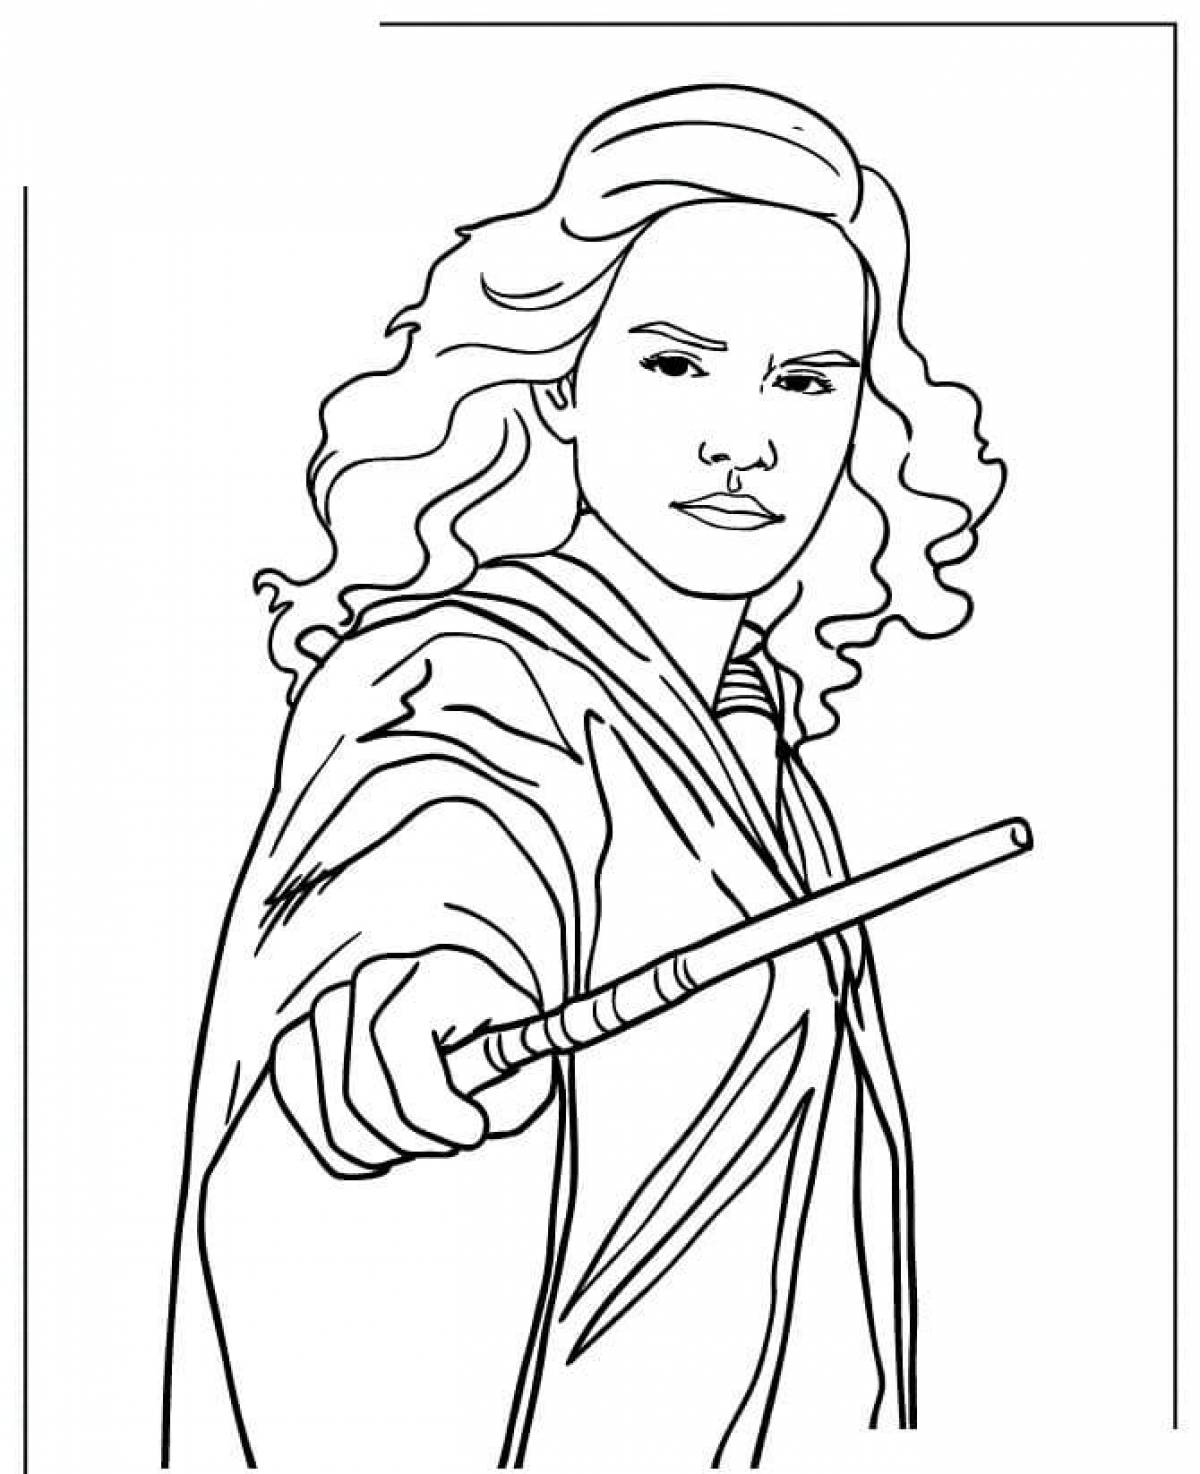 Hermione's manly coloring book